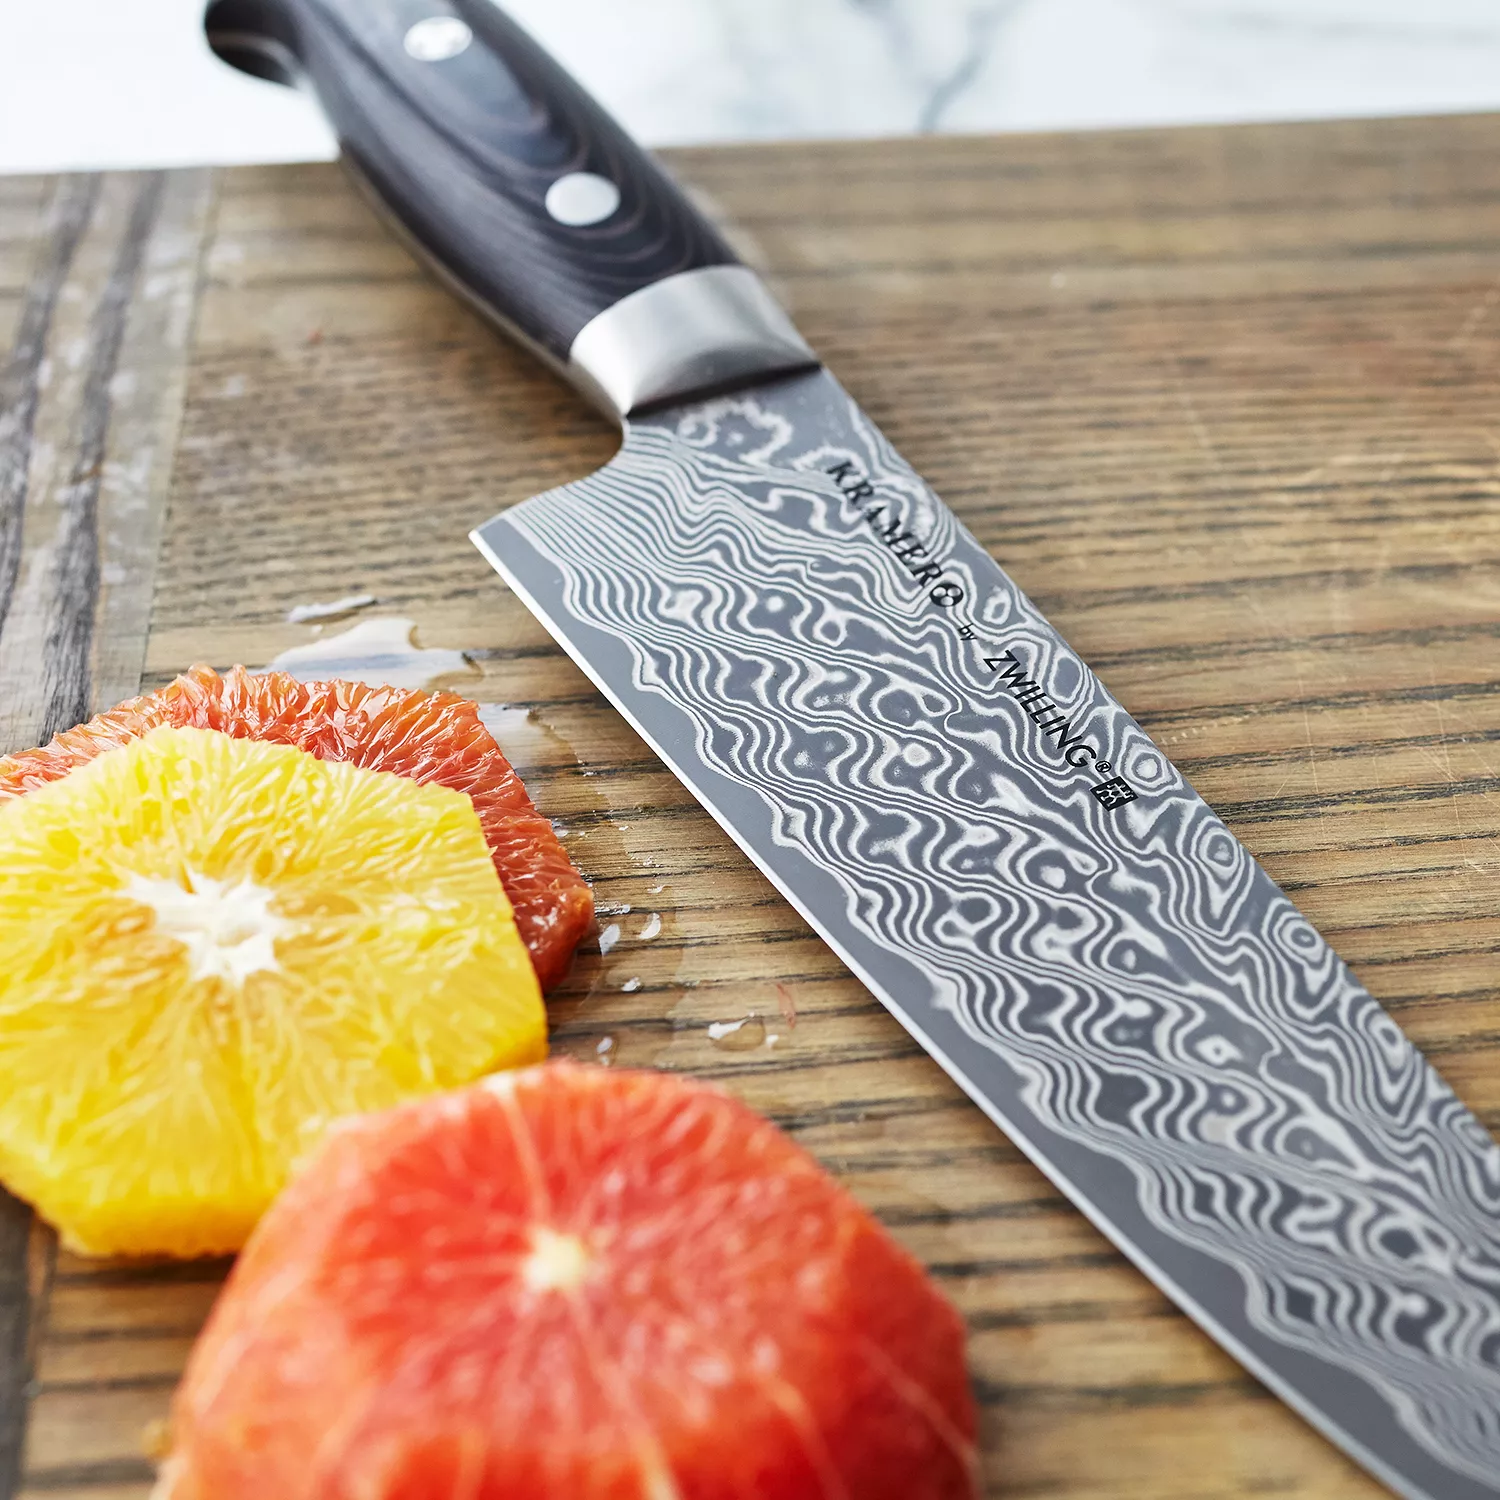 Stainless Damascus 3.5 Paring Knife by Zwilling J.A. Henckels - Kramer  Knives